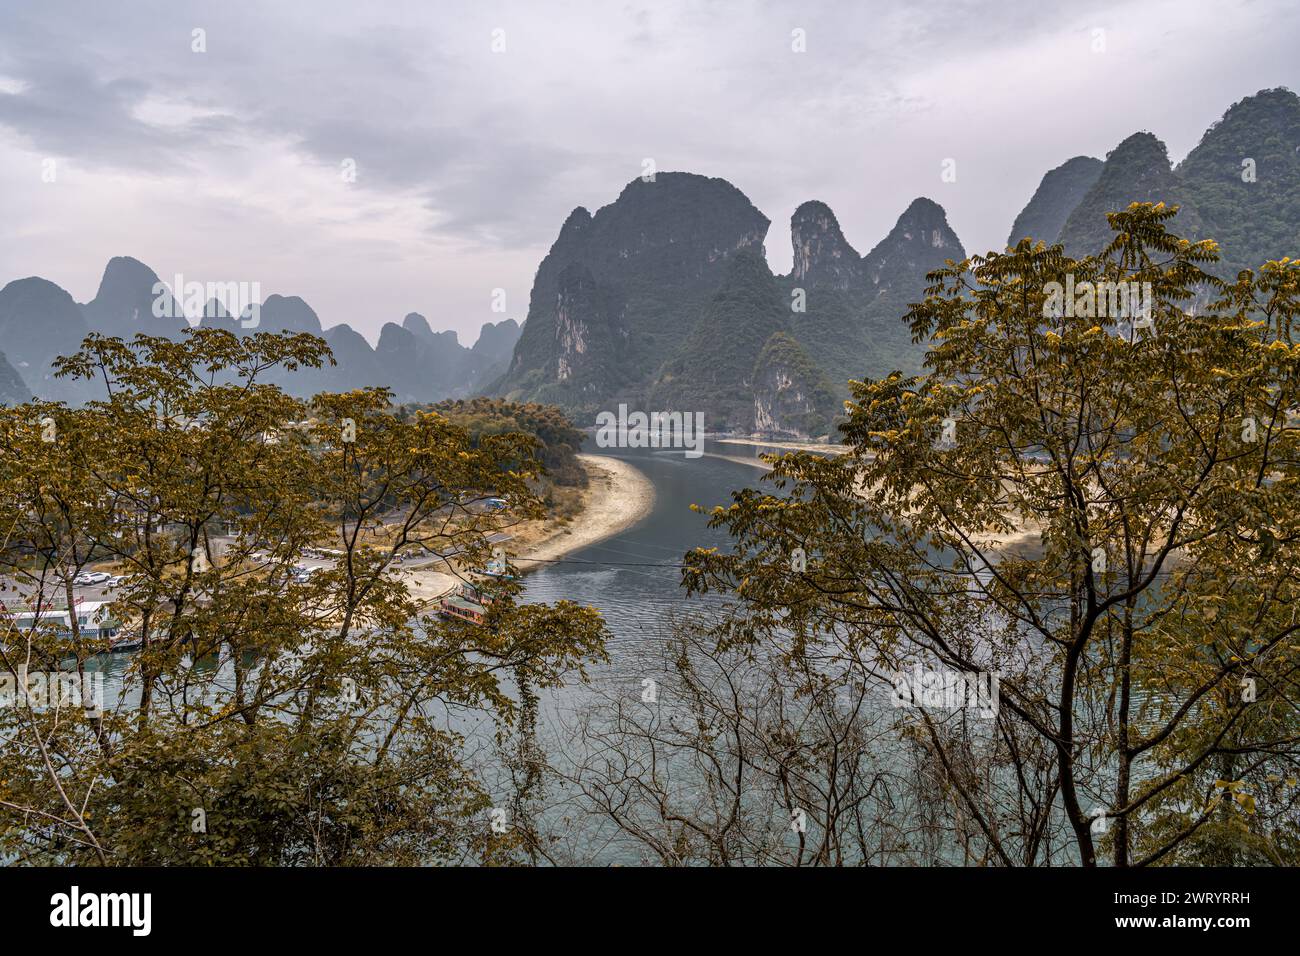 View of the Li River (Lijiang River) with azure water among scenic karst mountains at Yangshuo County of Guilin, China. Green hills on blue sky backgr Stock Photo